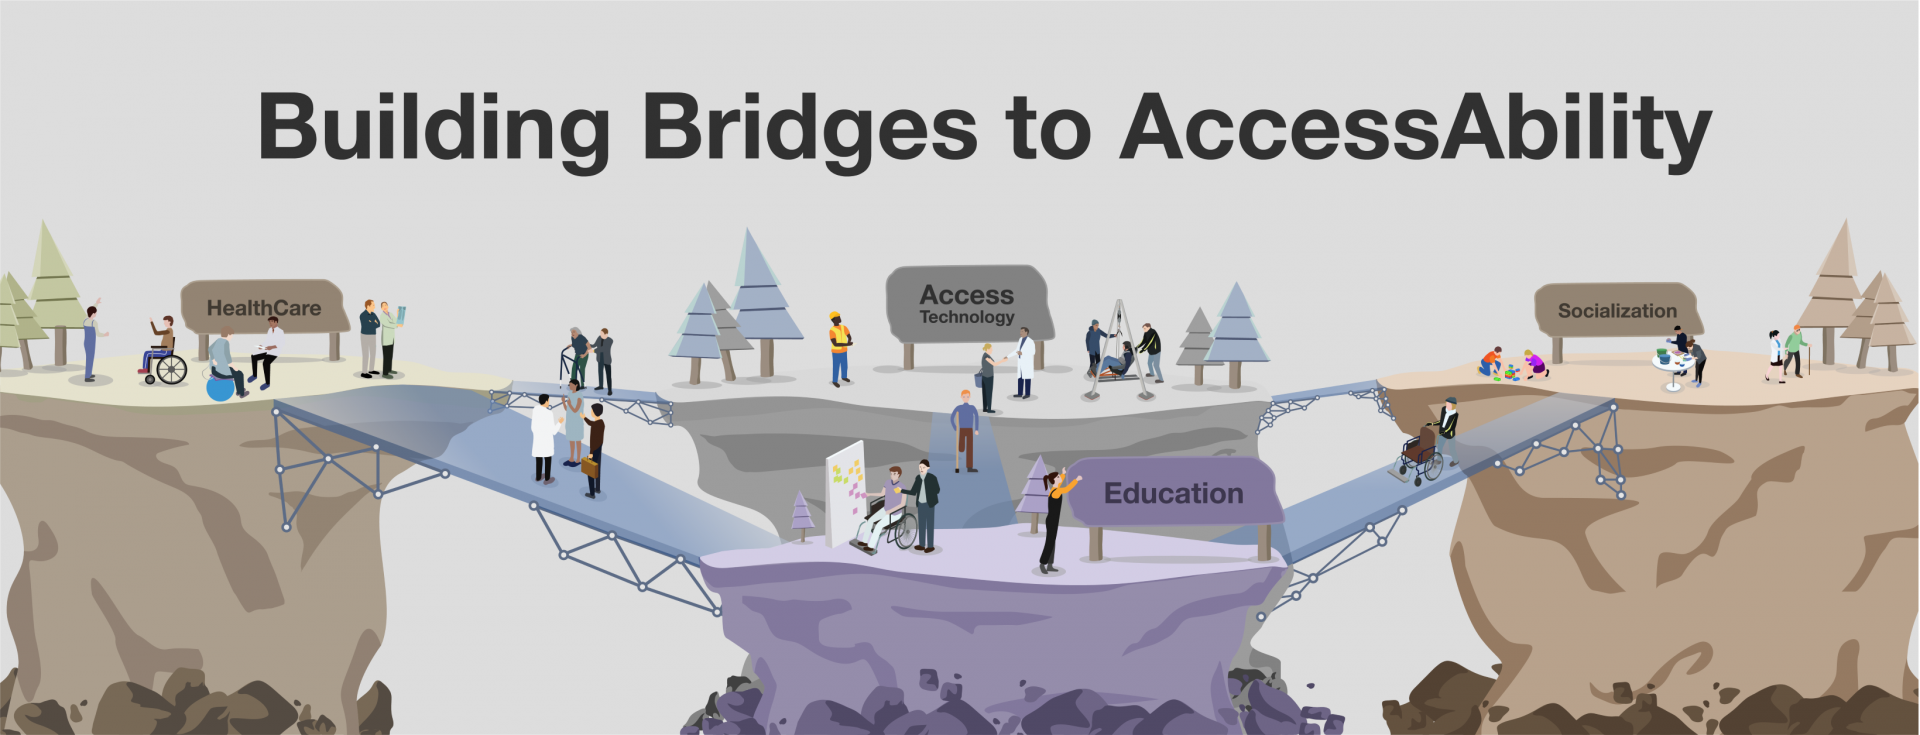 Graphic Image of Building Bridges to AccessAbility to show how access technology helps people overcome challenges by building bridges between Healthcare, Education, and Socialization. 